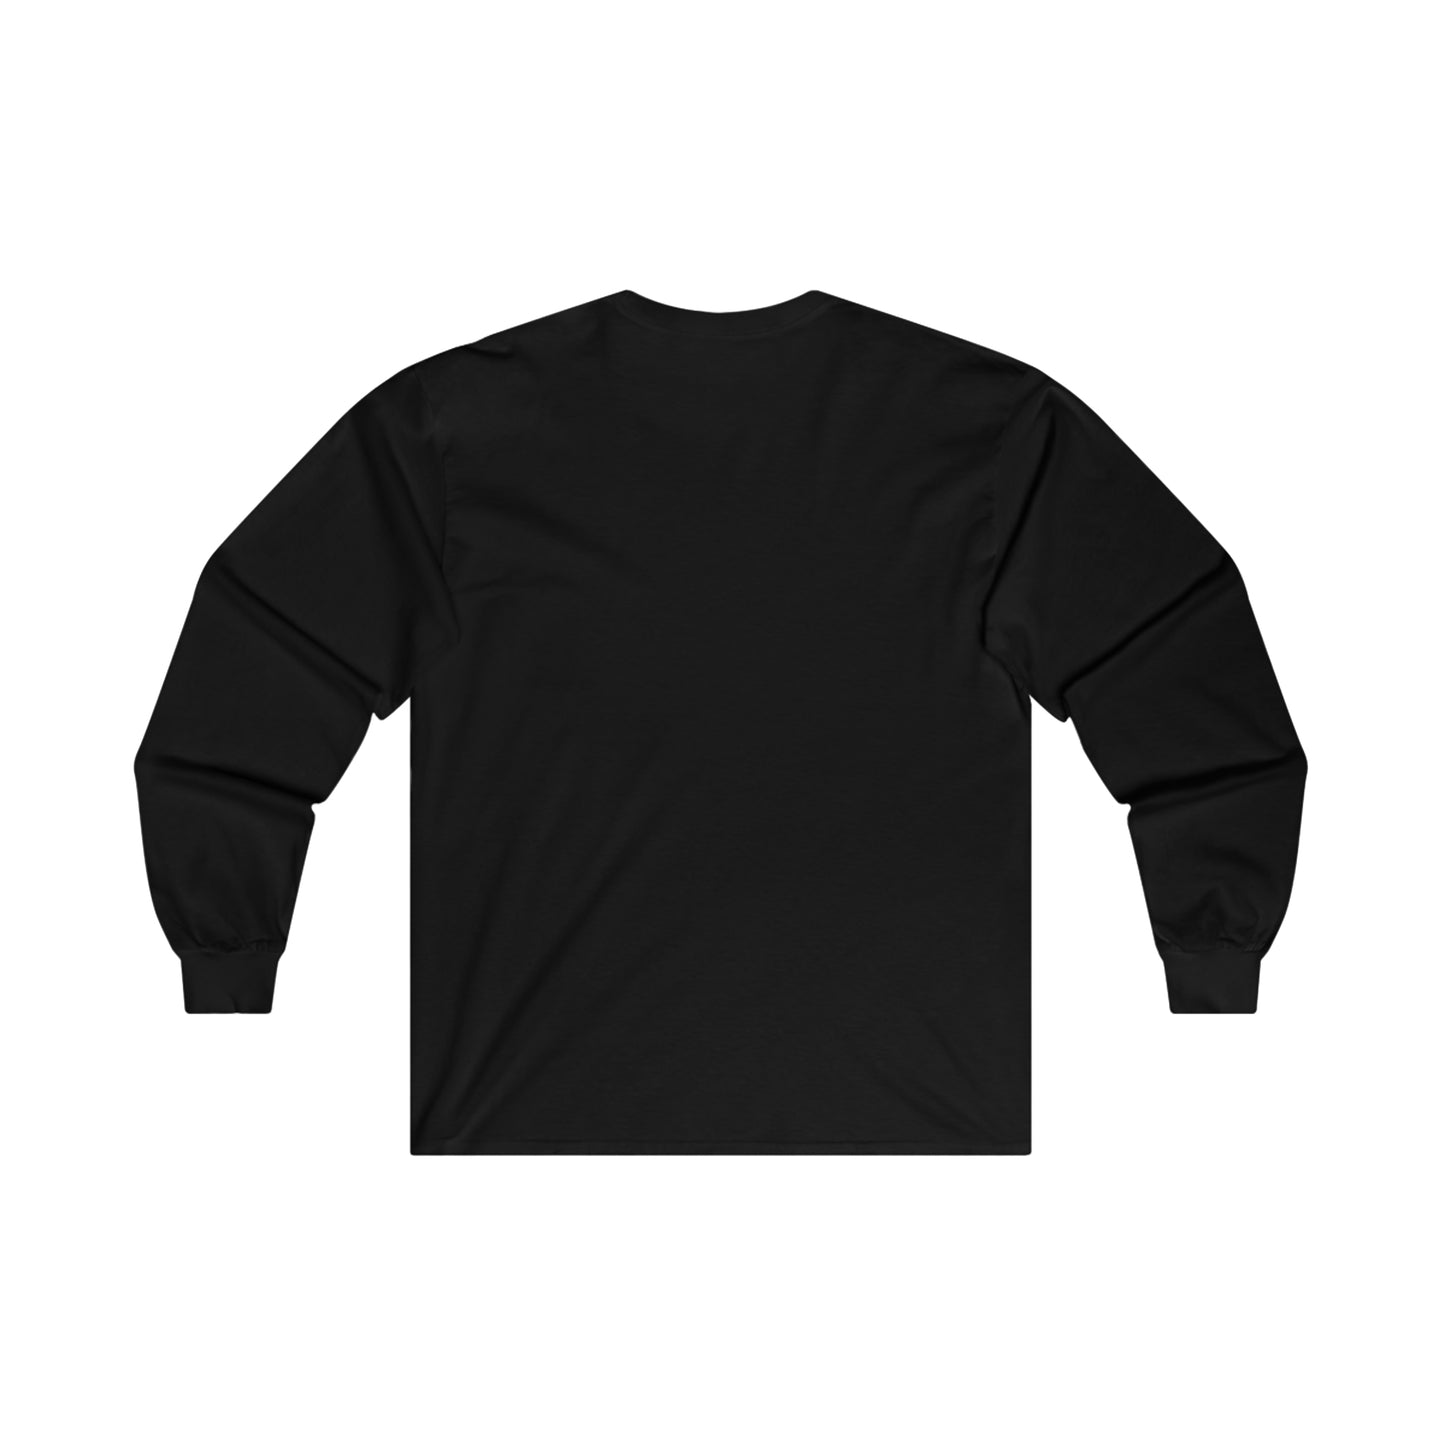 OBEY Ultra Cotton Long Sleeve Tee